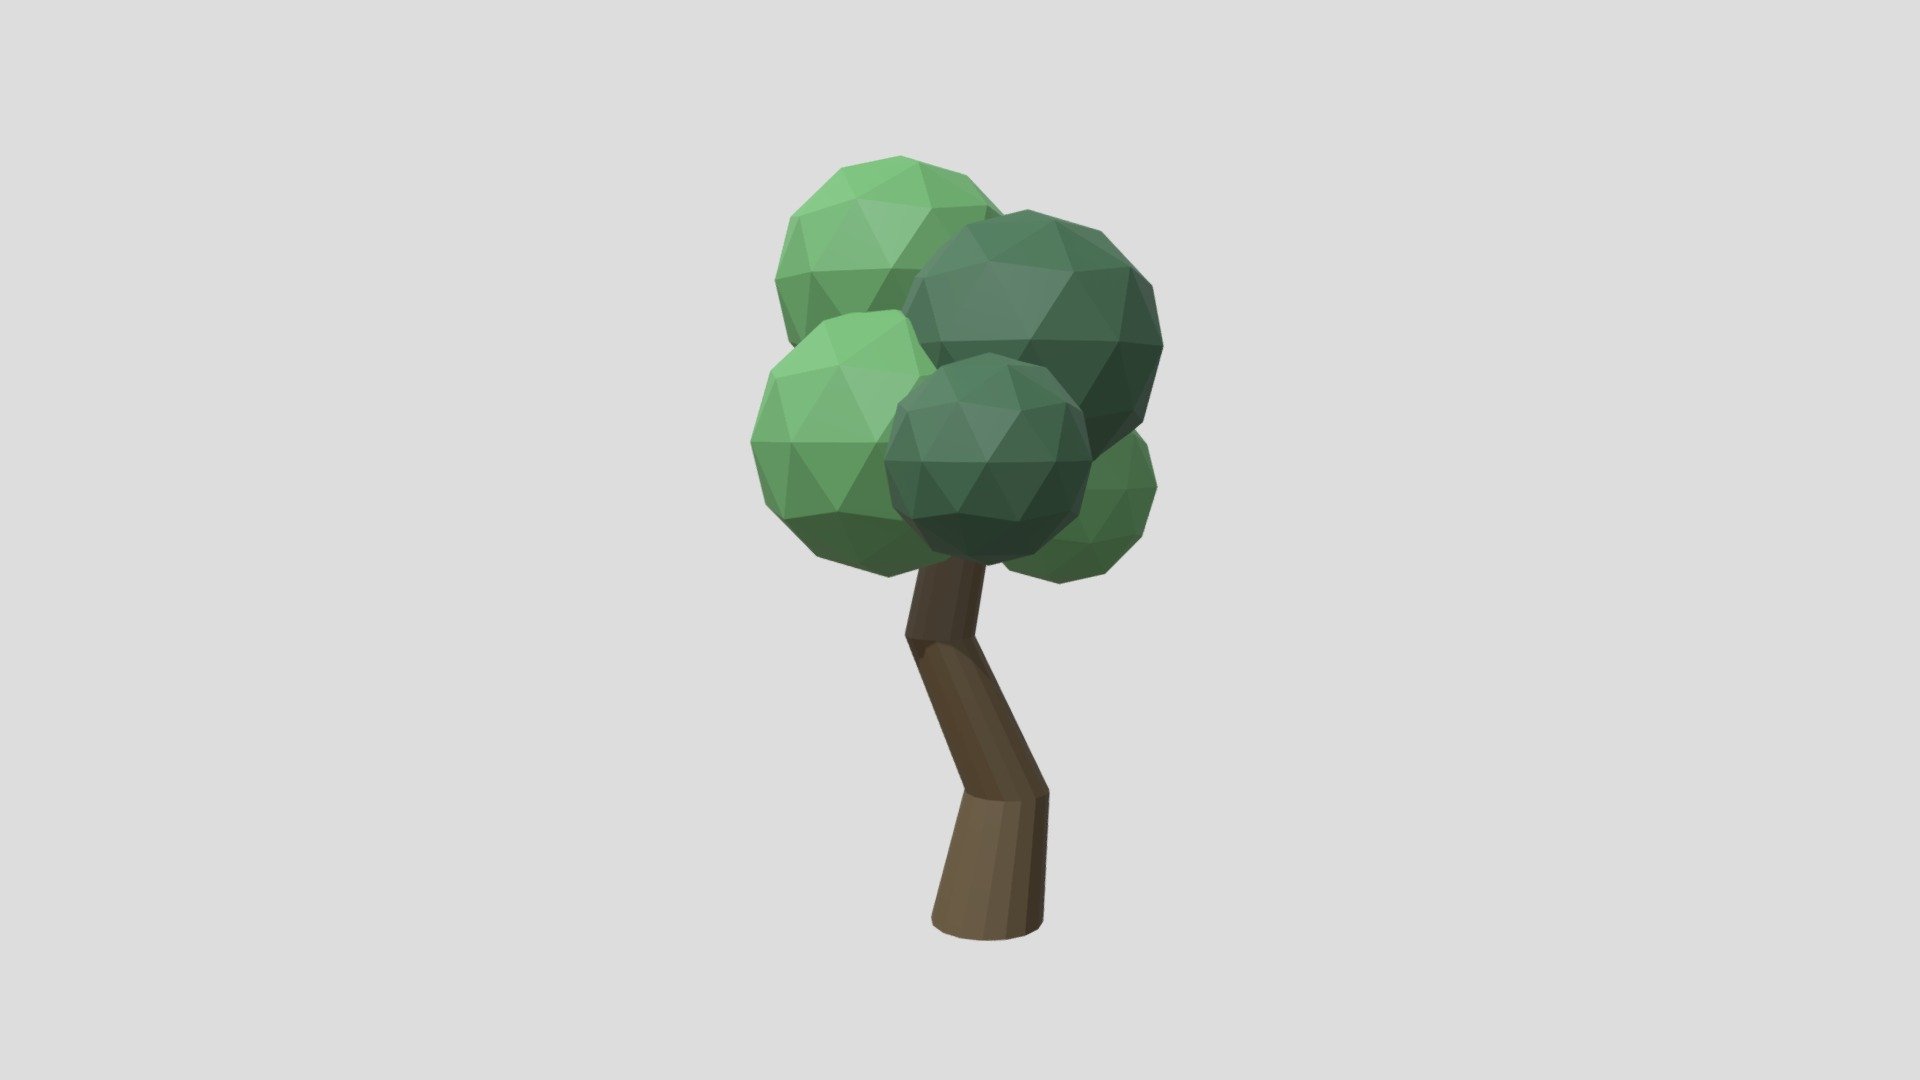 Easy to use blender file. 
Tree parts are separated by materials 3d model